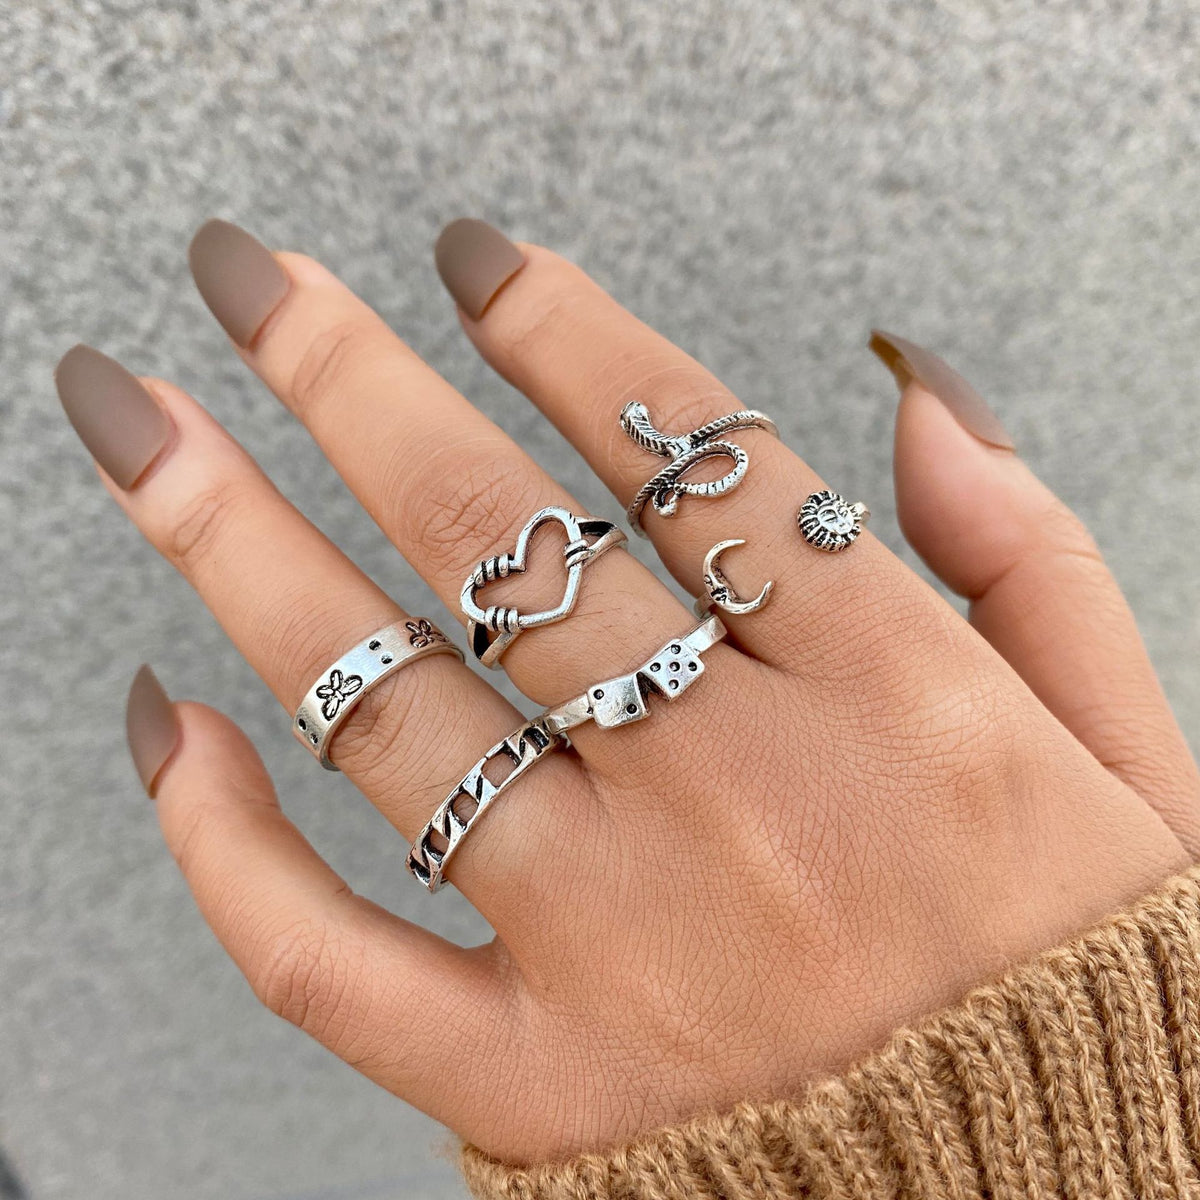 Arzonai Creative retro snake-shaped dice ring set 6-piece set of cross-border new hollow love chain joint ring for women and Girls